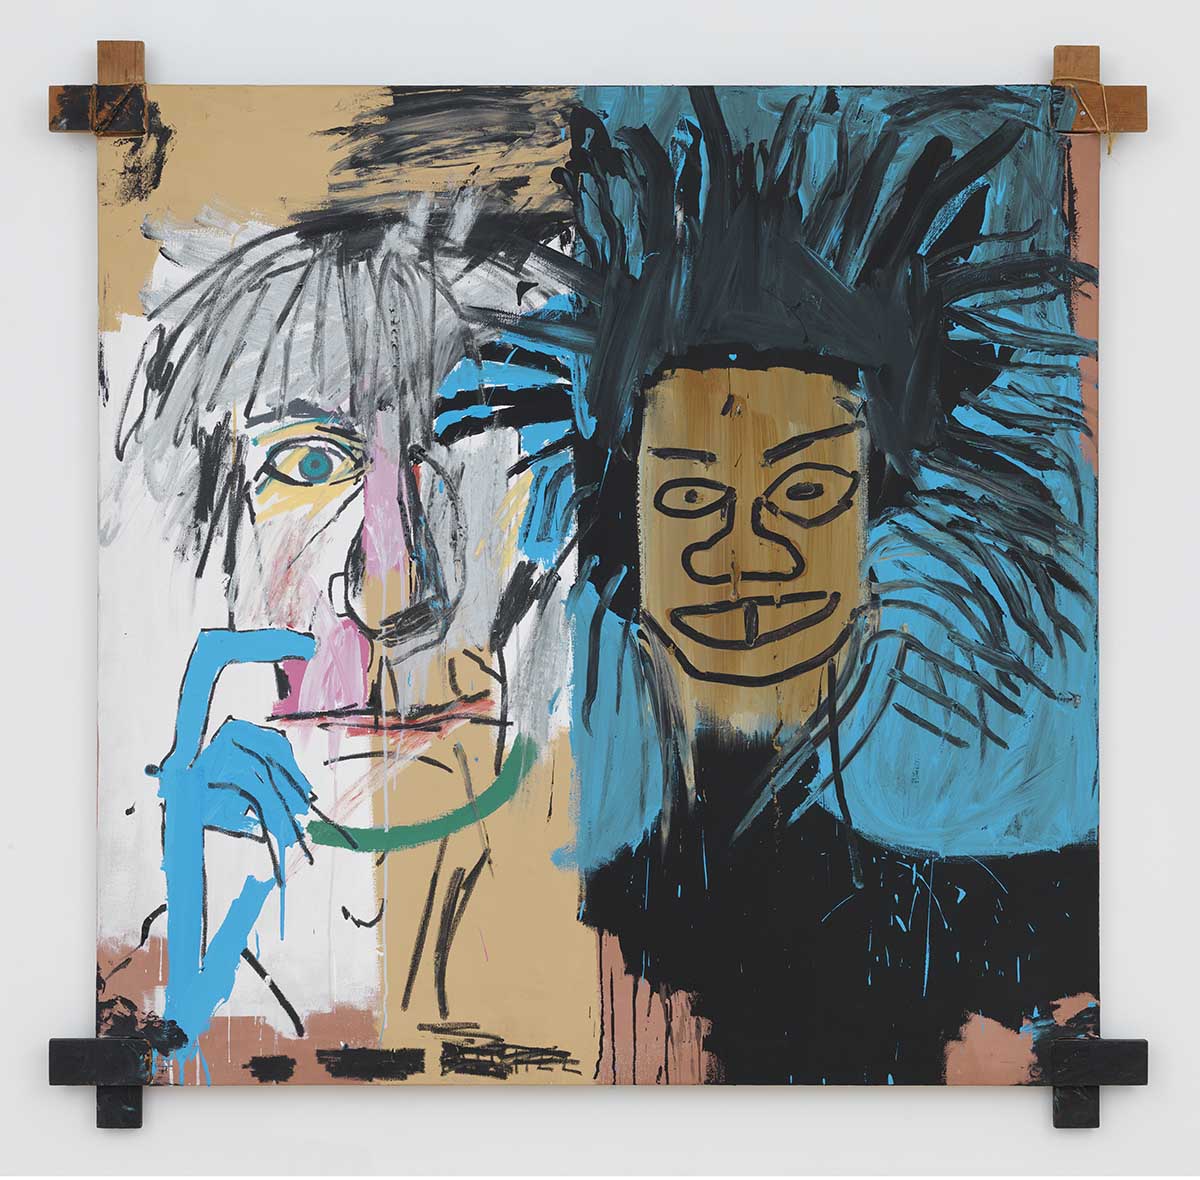 A drawing of two men's faces with crazy hair, one in a blue background and one on a yellow background